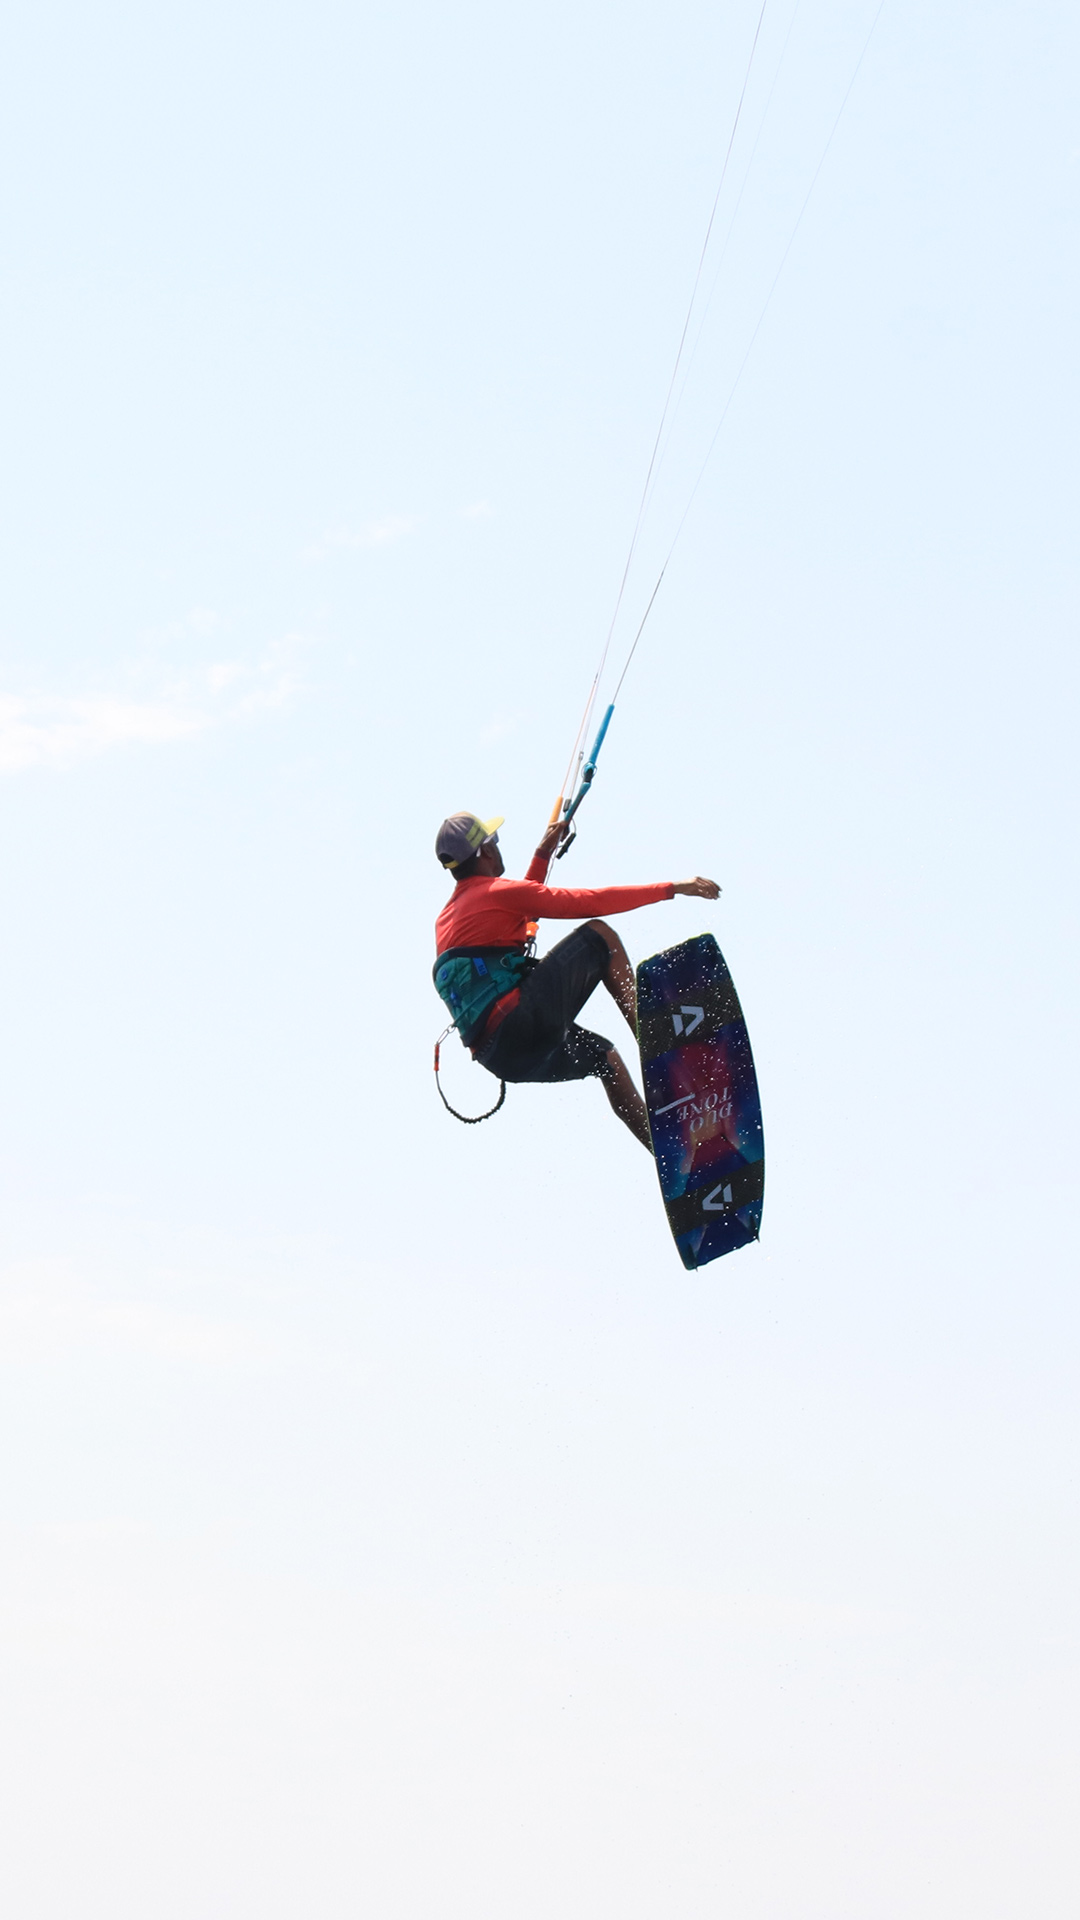 A kitesurfing instructor has jumped out and is now flying over the clear blue sky in the waters of the Safaga spot.